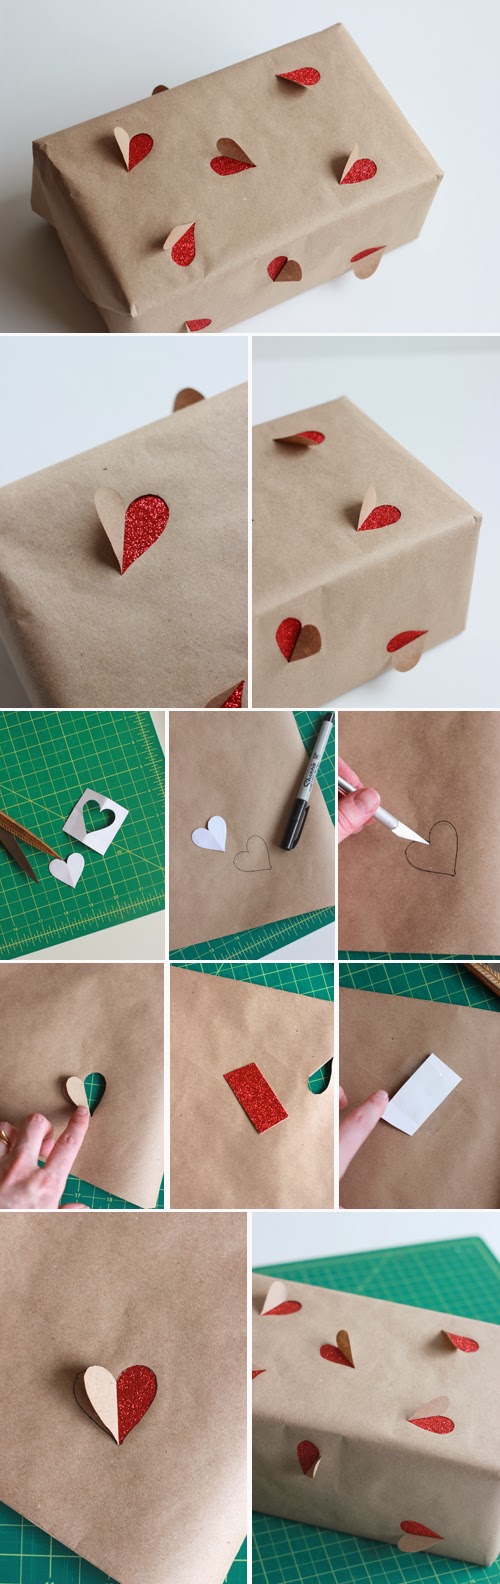 How-To: Cutout Tissue Paper Gift Wrap - Make